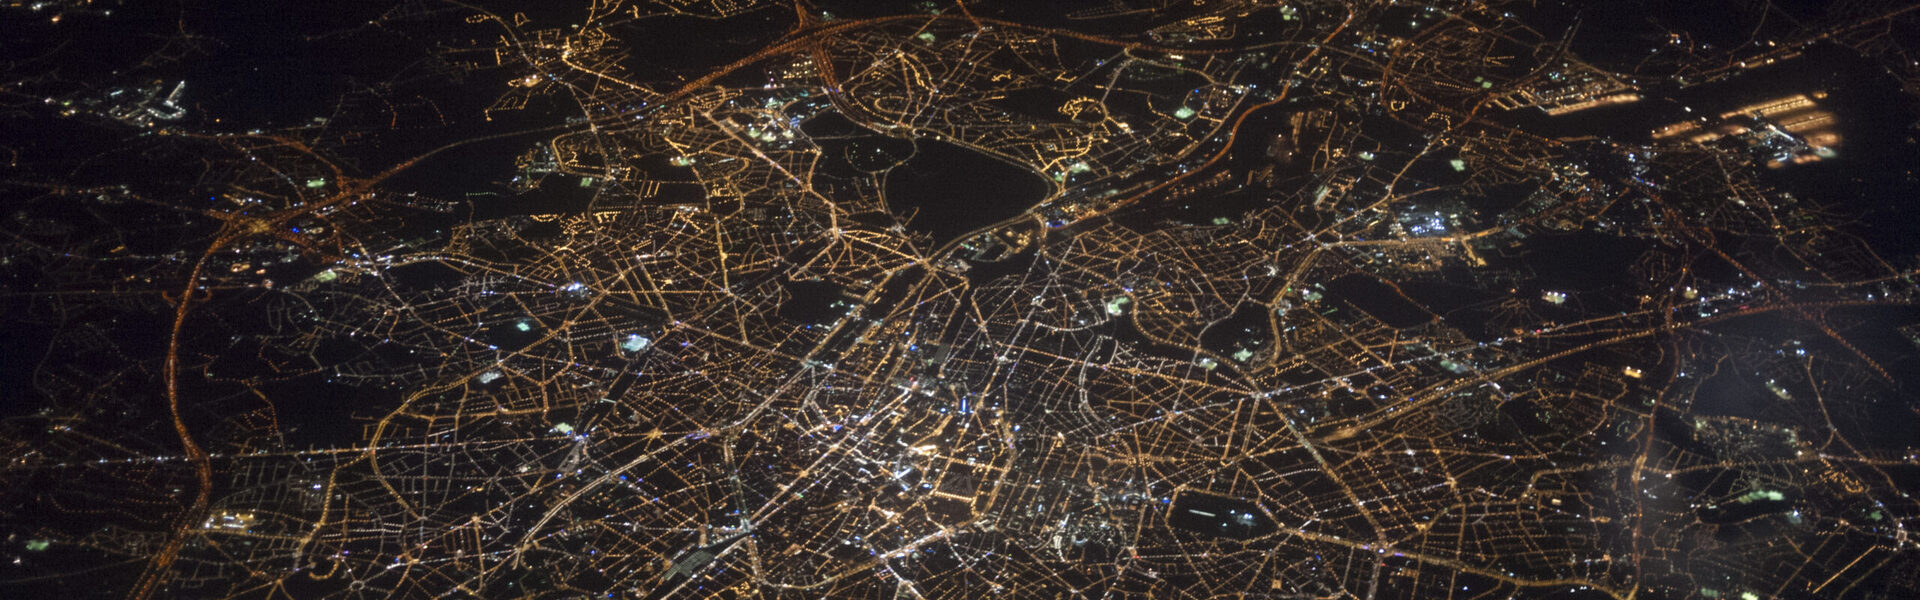 Aerial view of Brussels at night